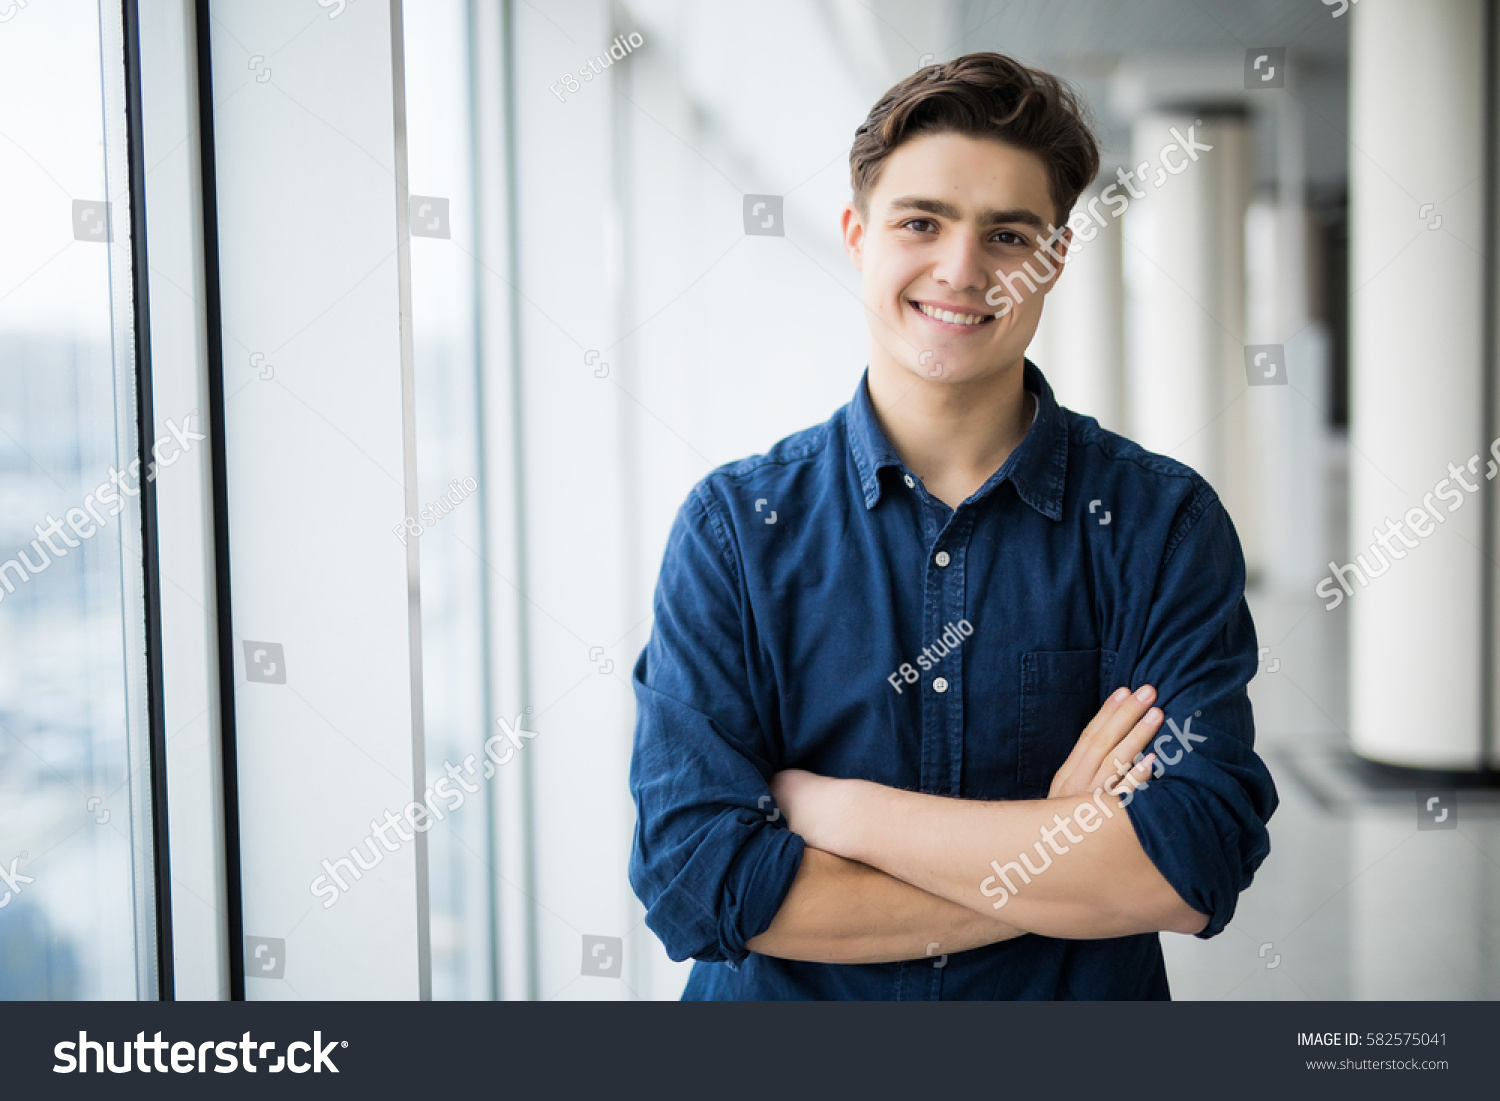 Portrait of young man with crossed hands near in window. #582575041